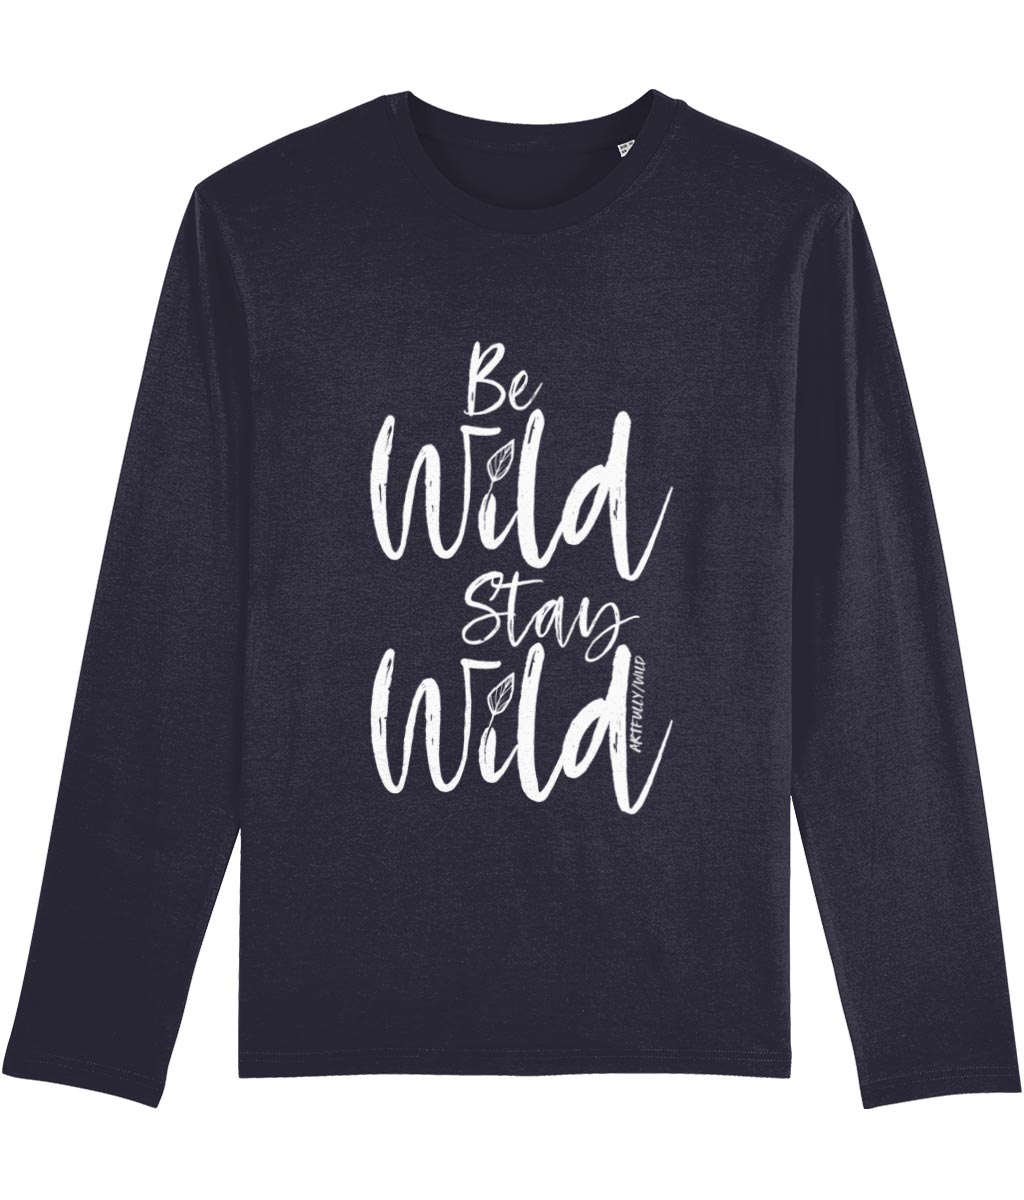 ‘BE WILD STAY WILD’ Men's Navy Long-Sleeved T-Shirt. Certified organic cotton. White slogan print with water-based inks.